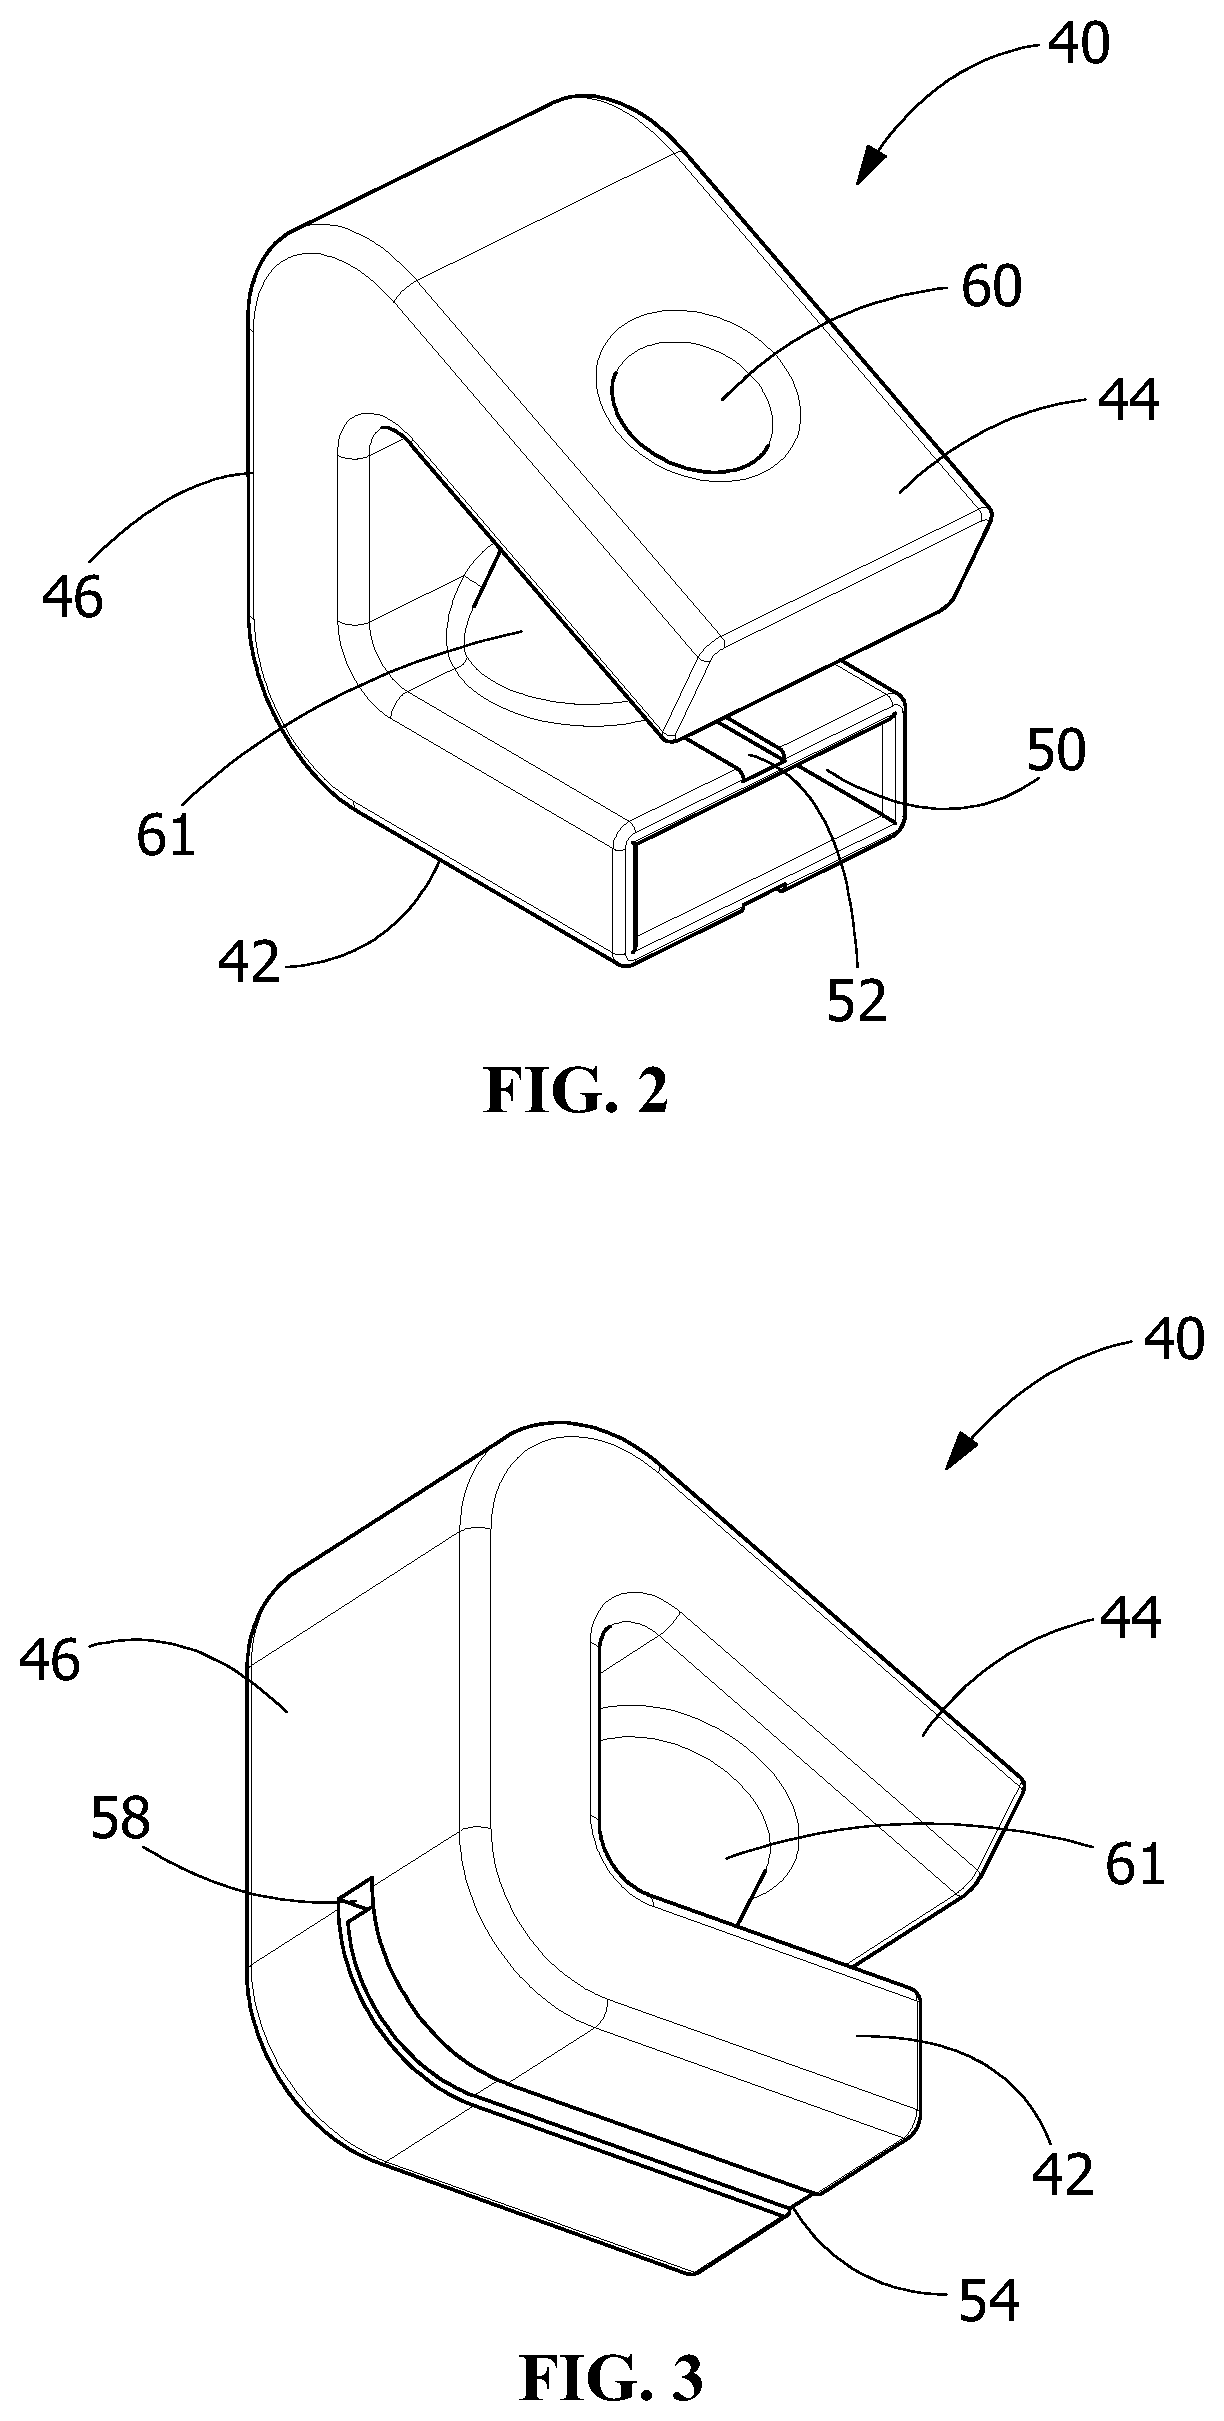 Device and method to facilitate the opening and closing and closing of a ski boot